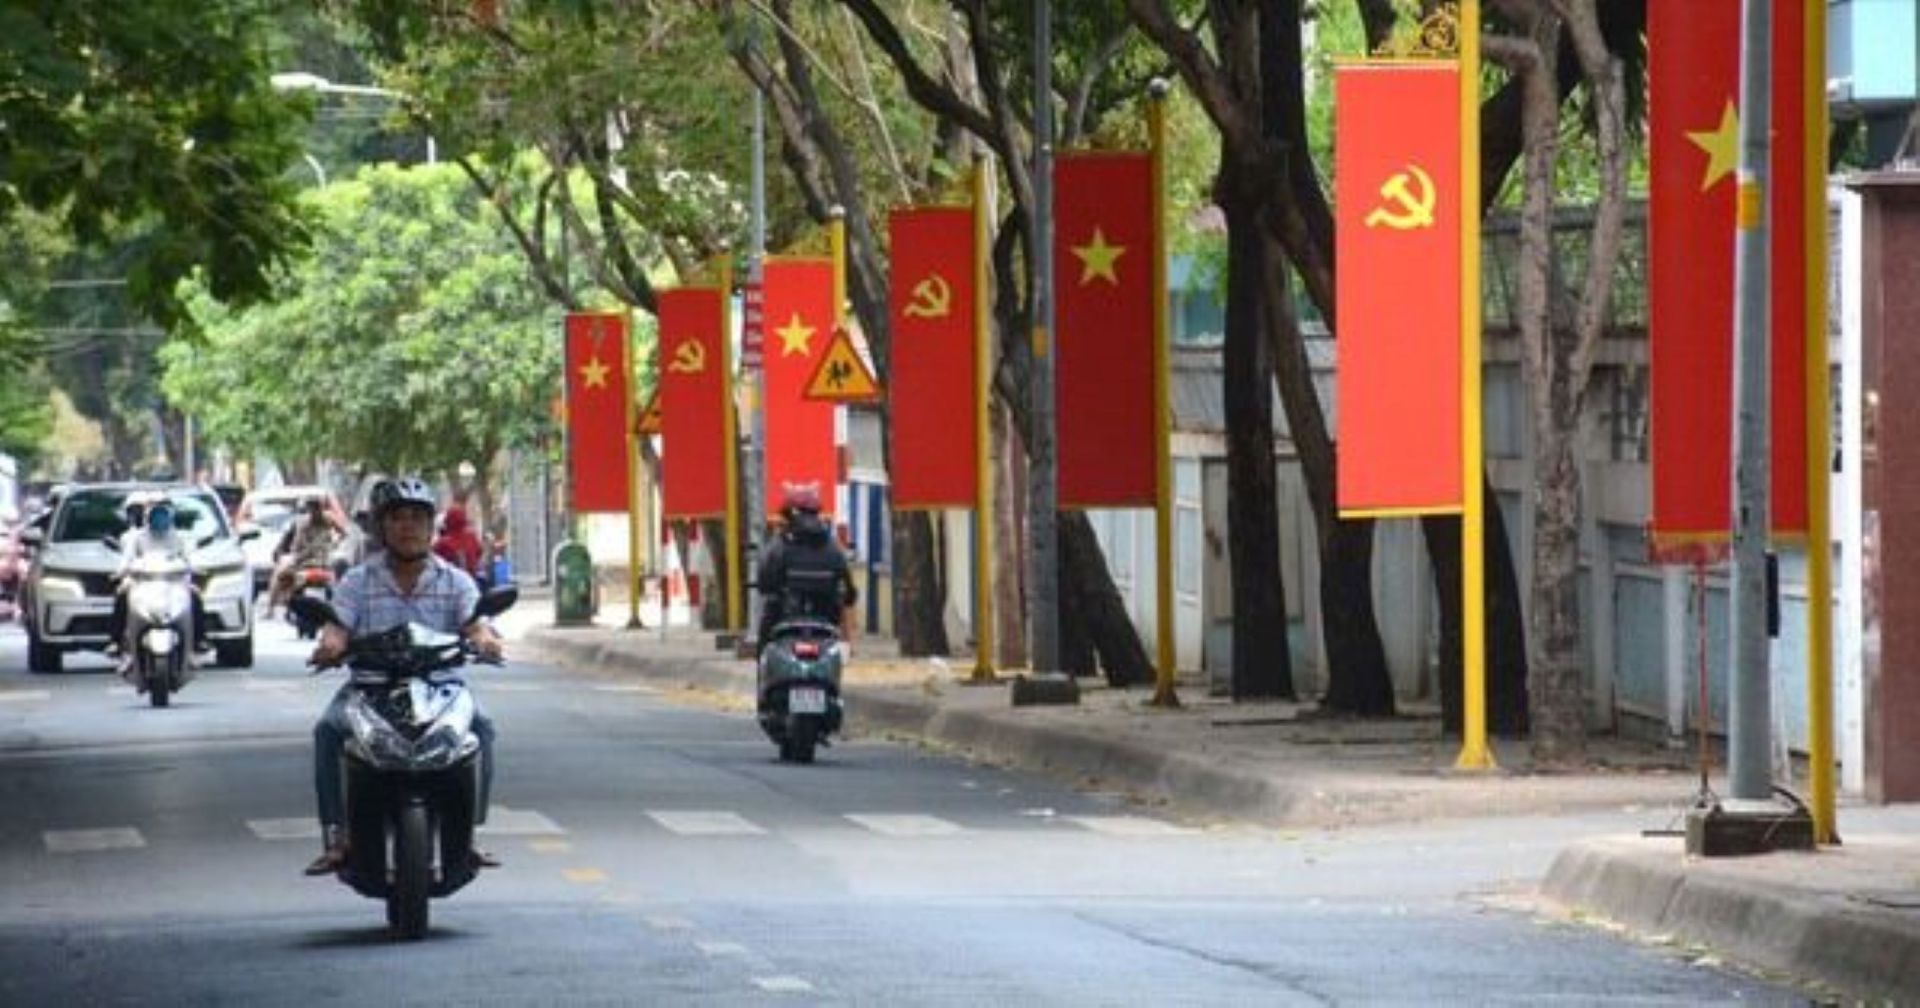 Vibrant Ho Chi Minh City: Vietnam Flags Adorn Streets for Reunification & Labor Day 30/4